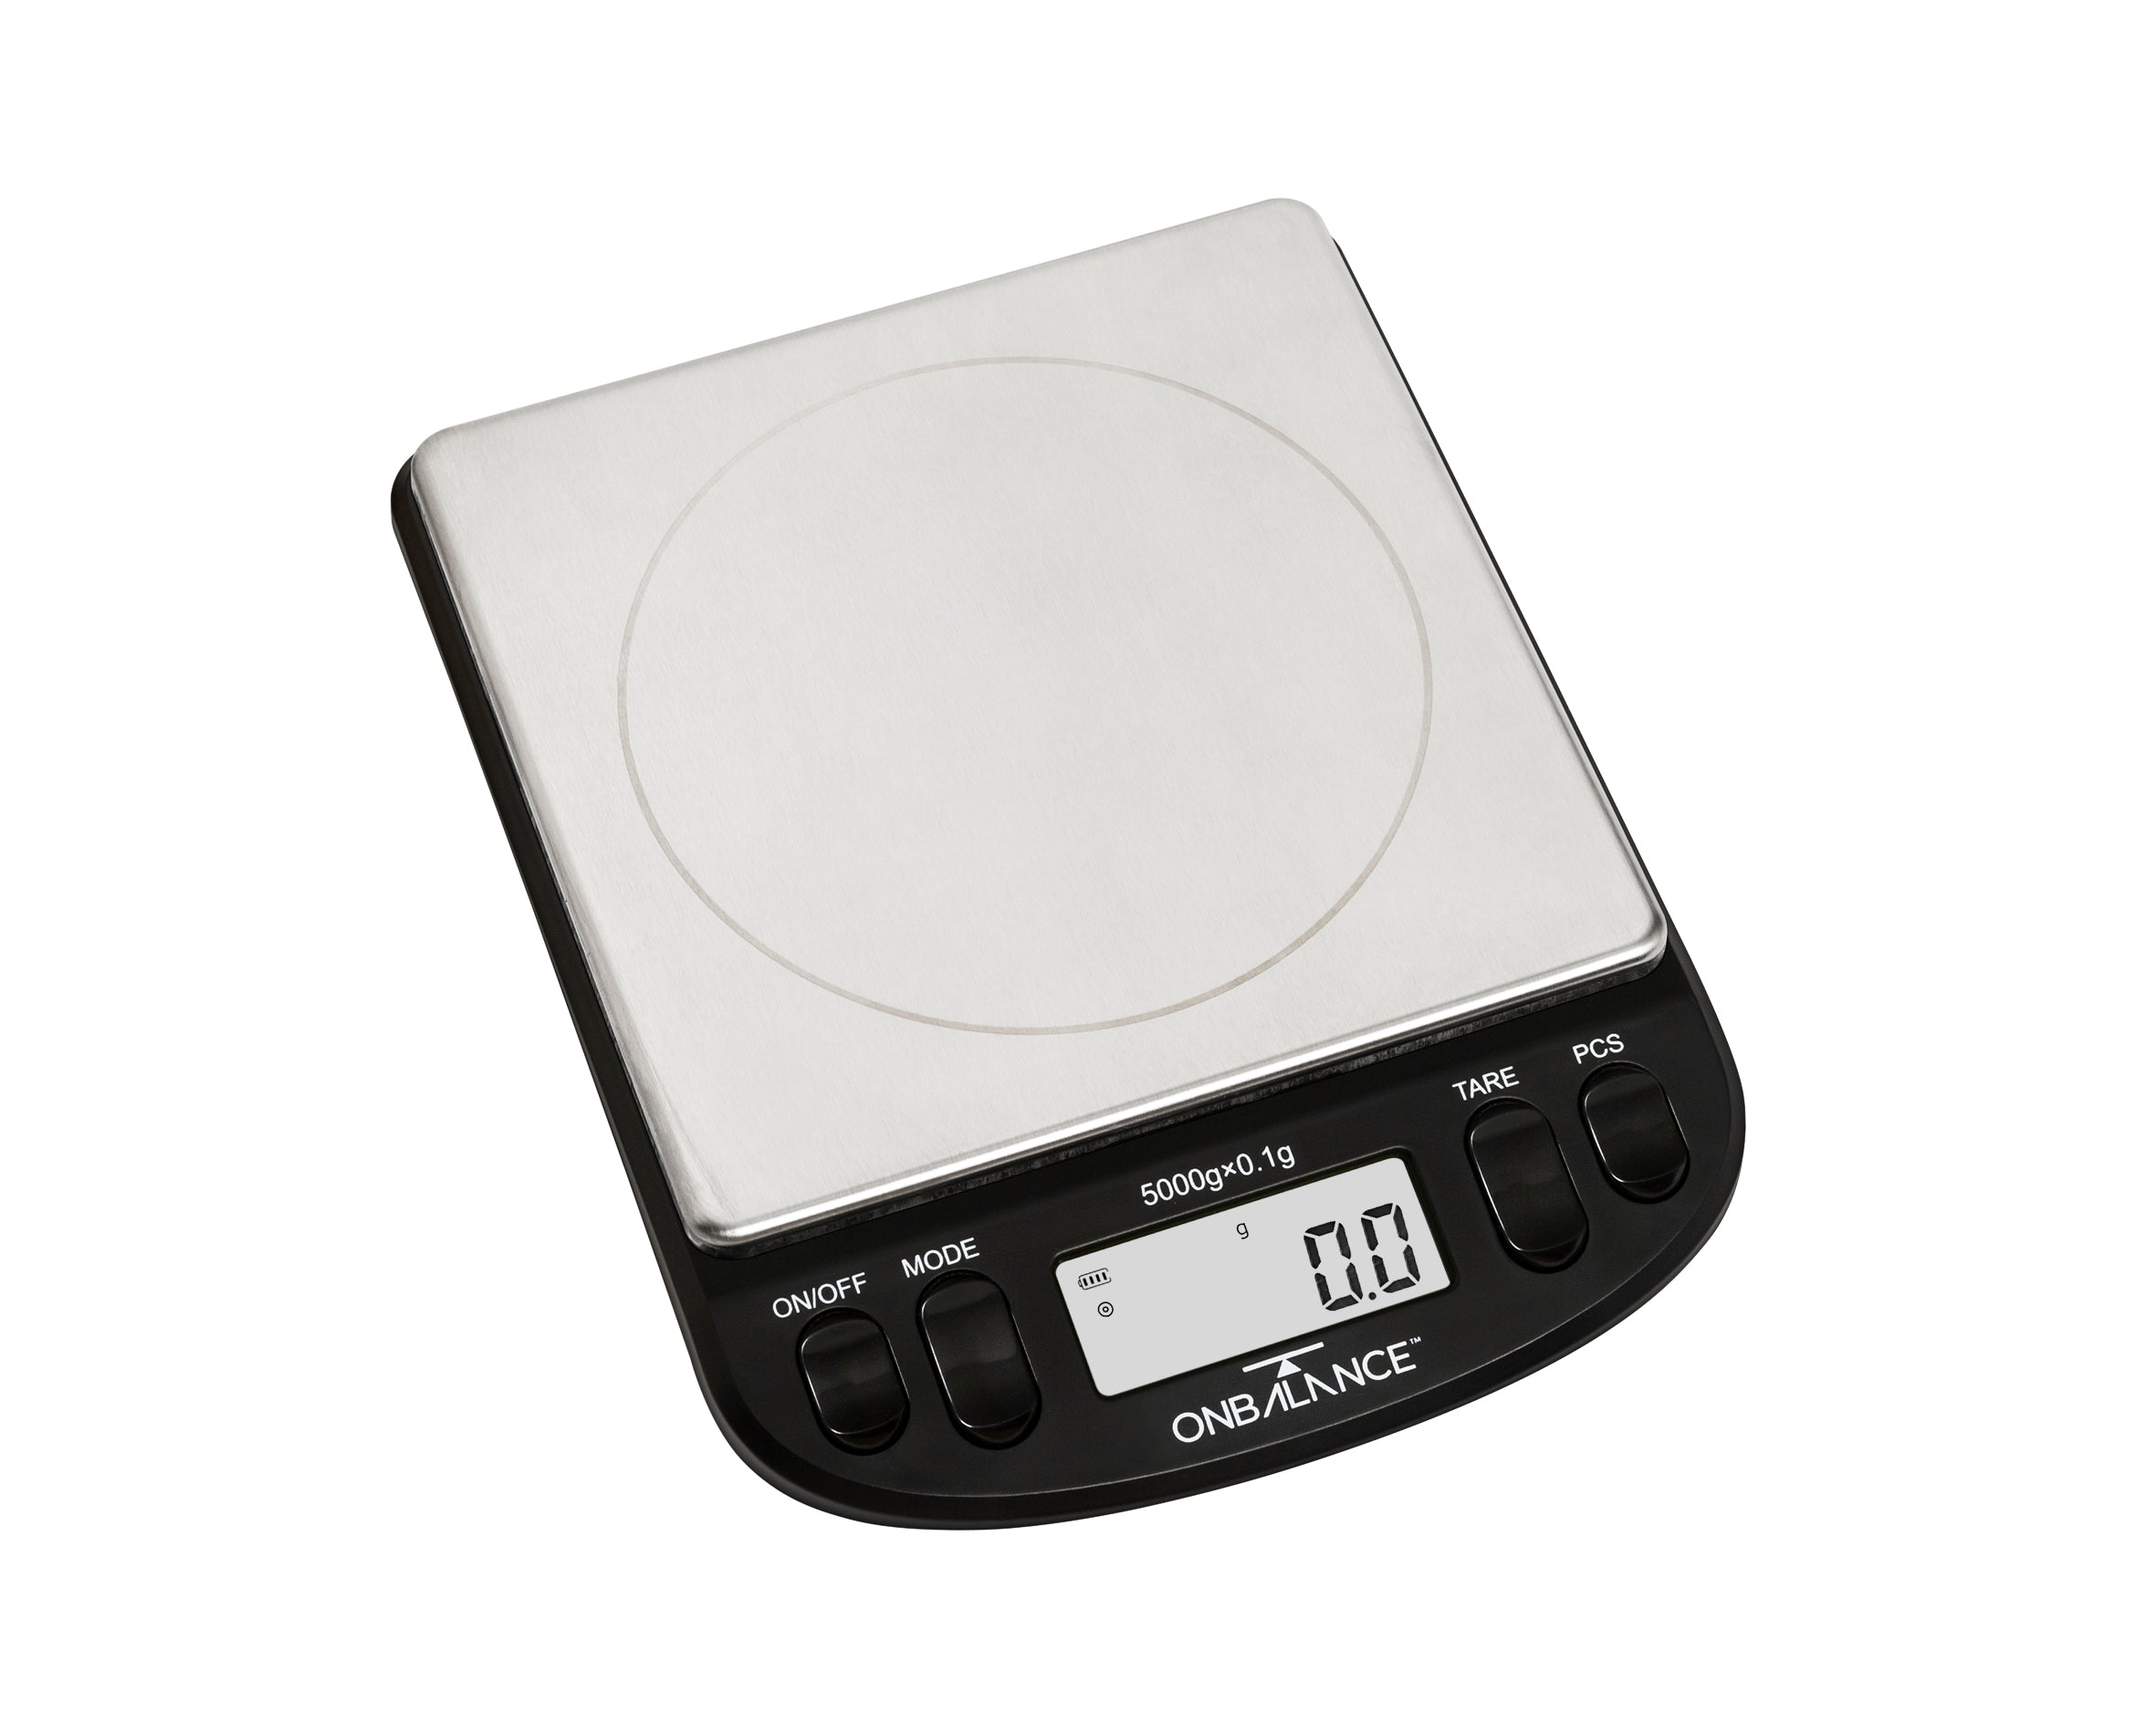 IS-5KG-BK Intrepid Series Compact Bench Scale - 5000g x 0.1g